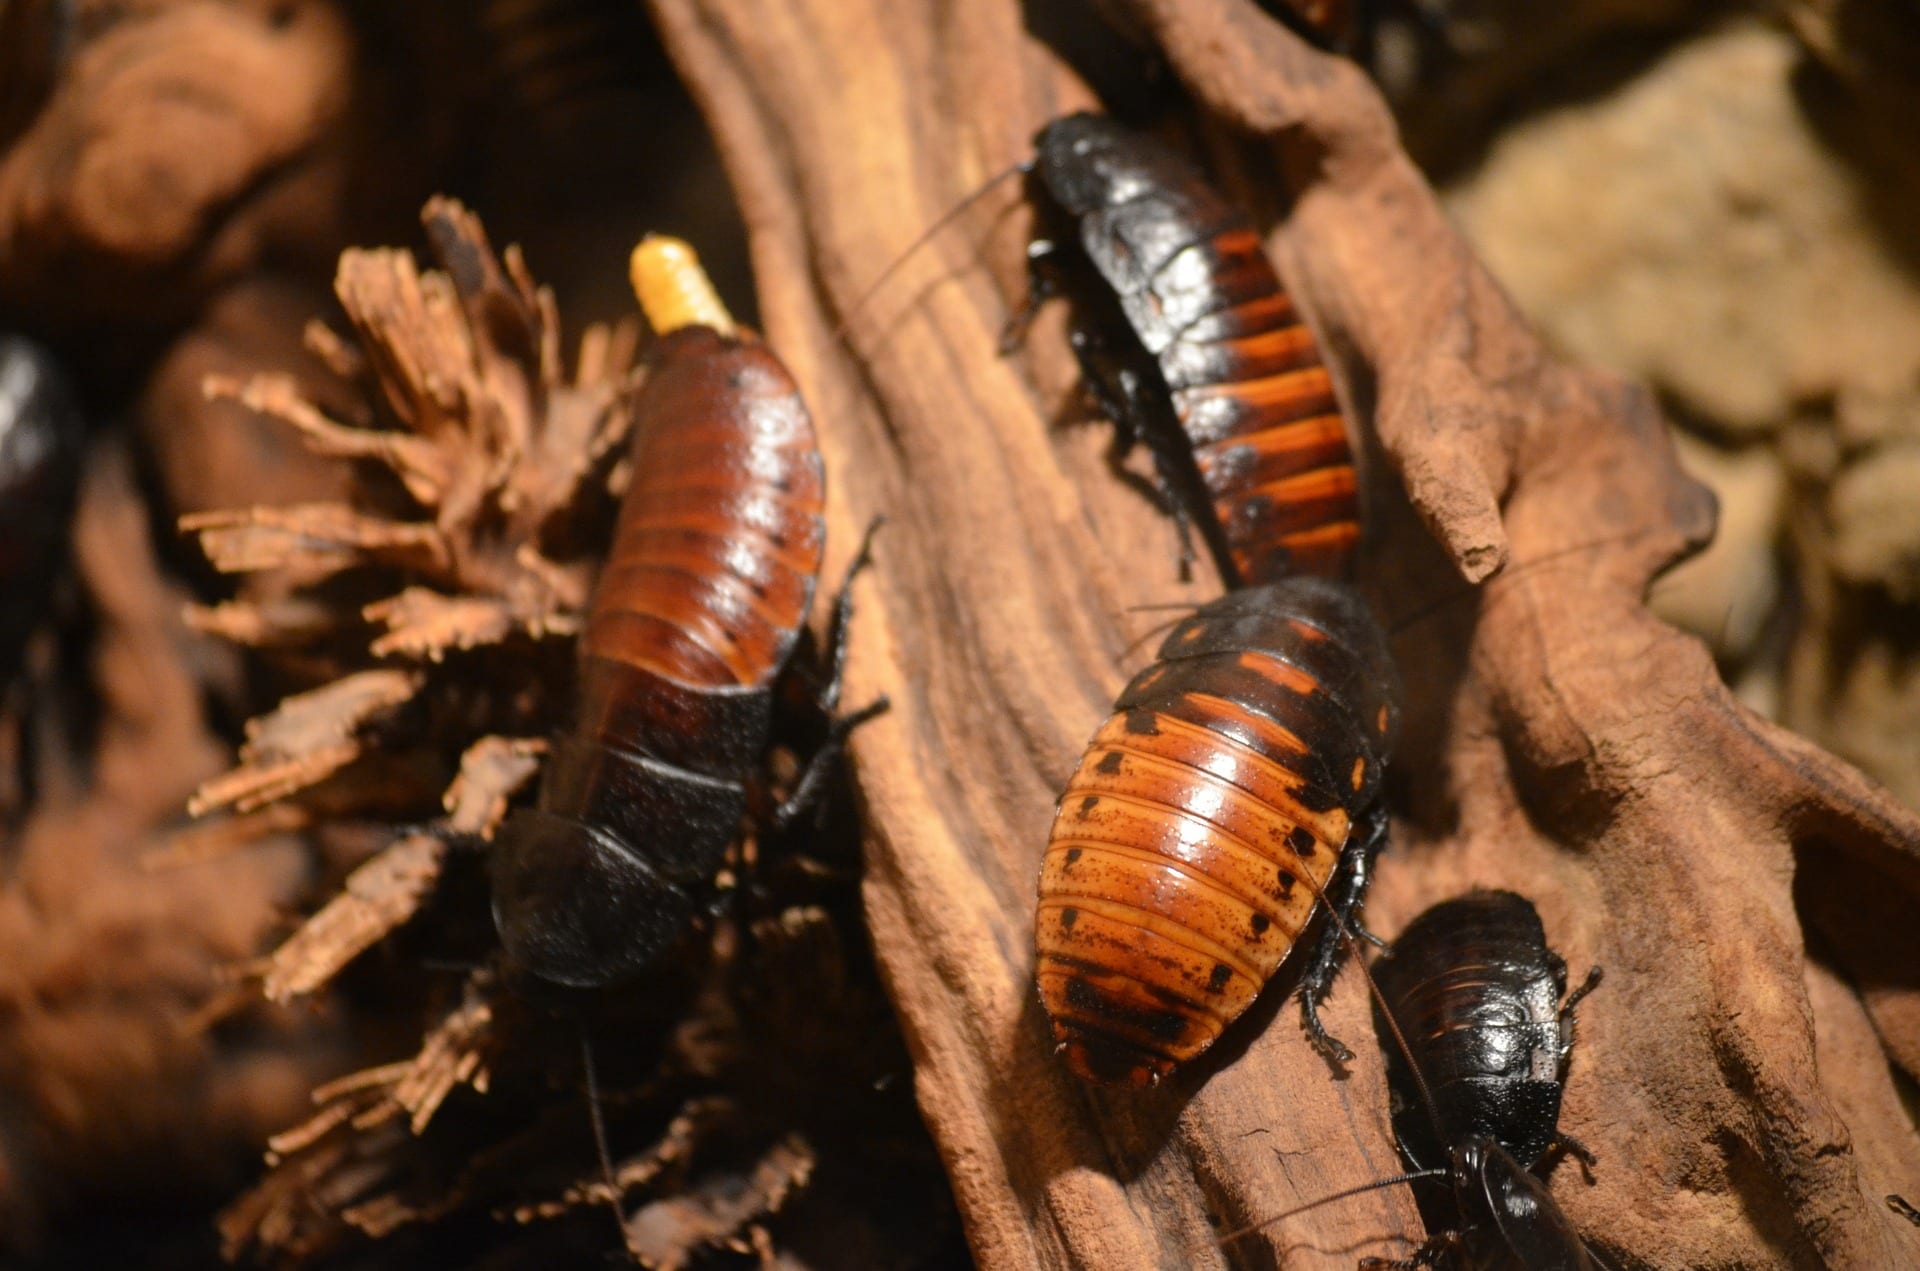 4 cockroaches climbing on a piece of wood.